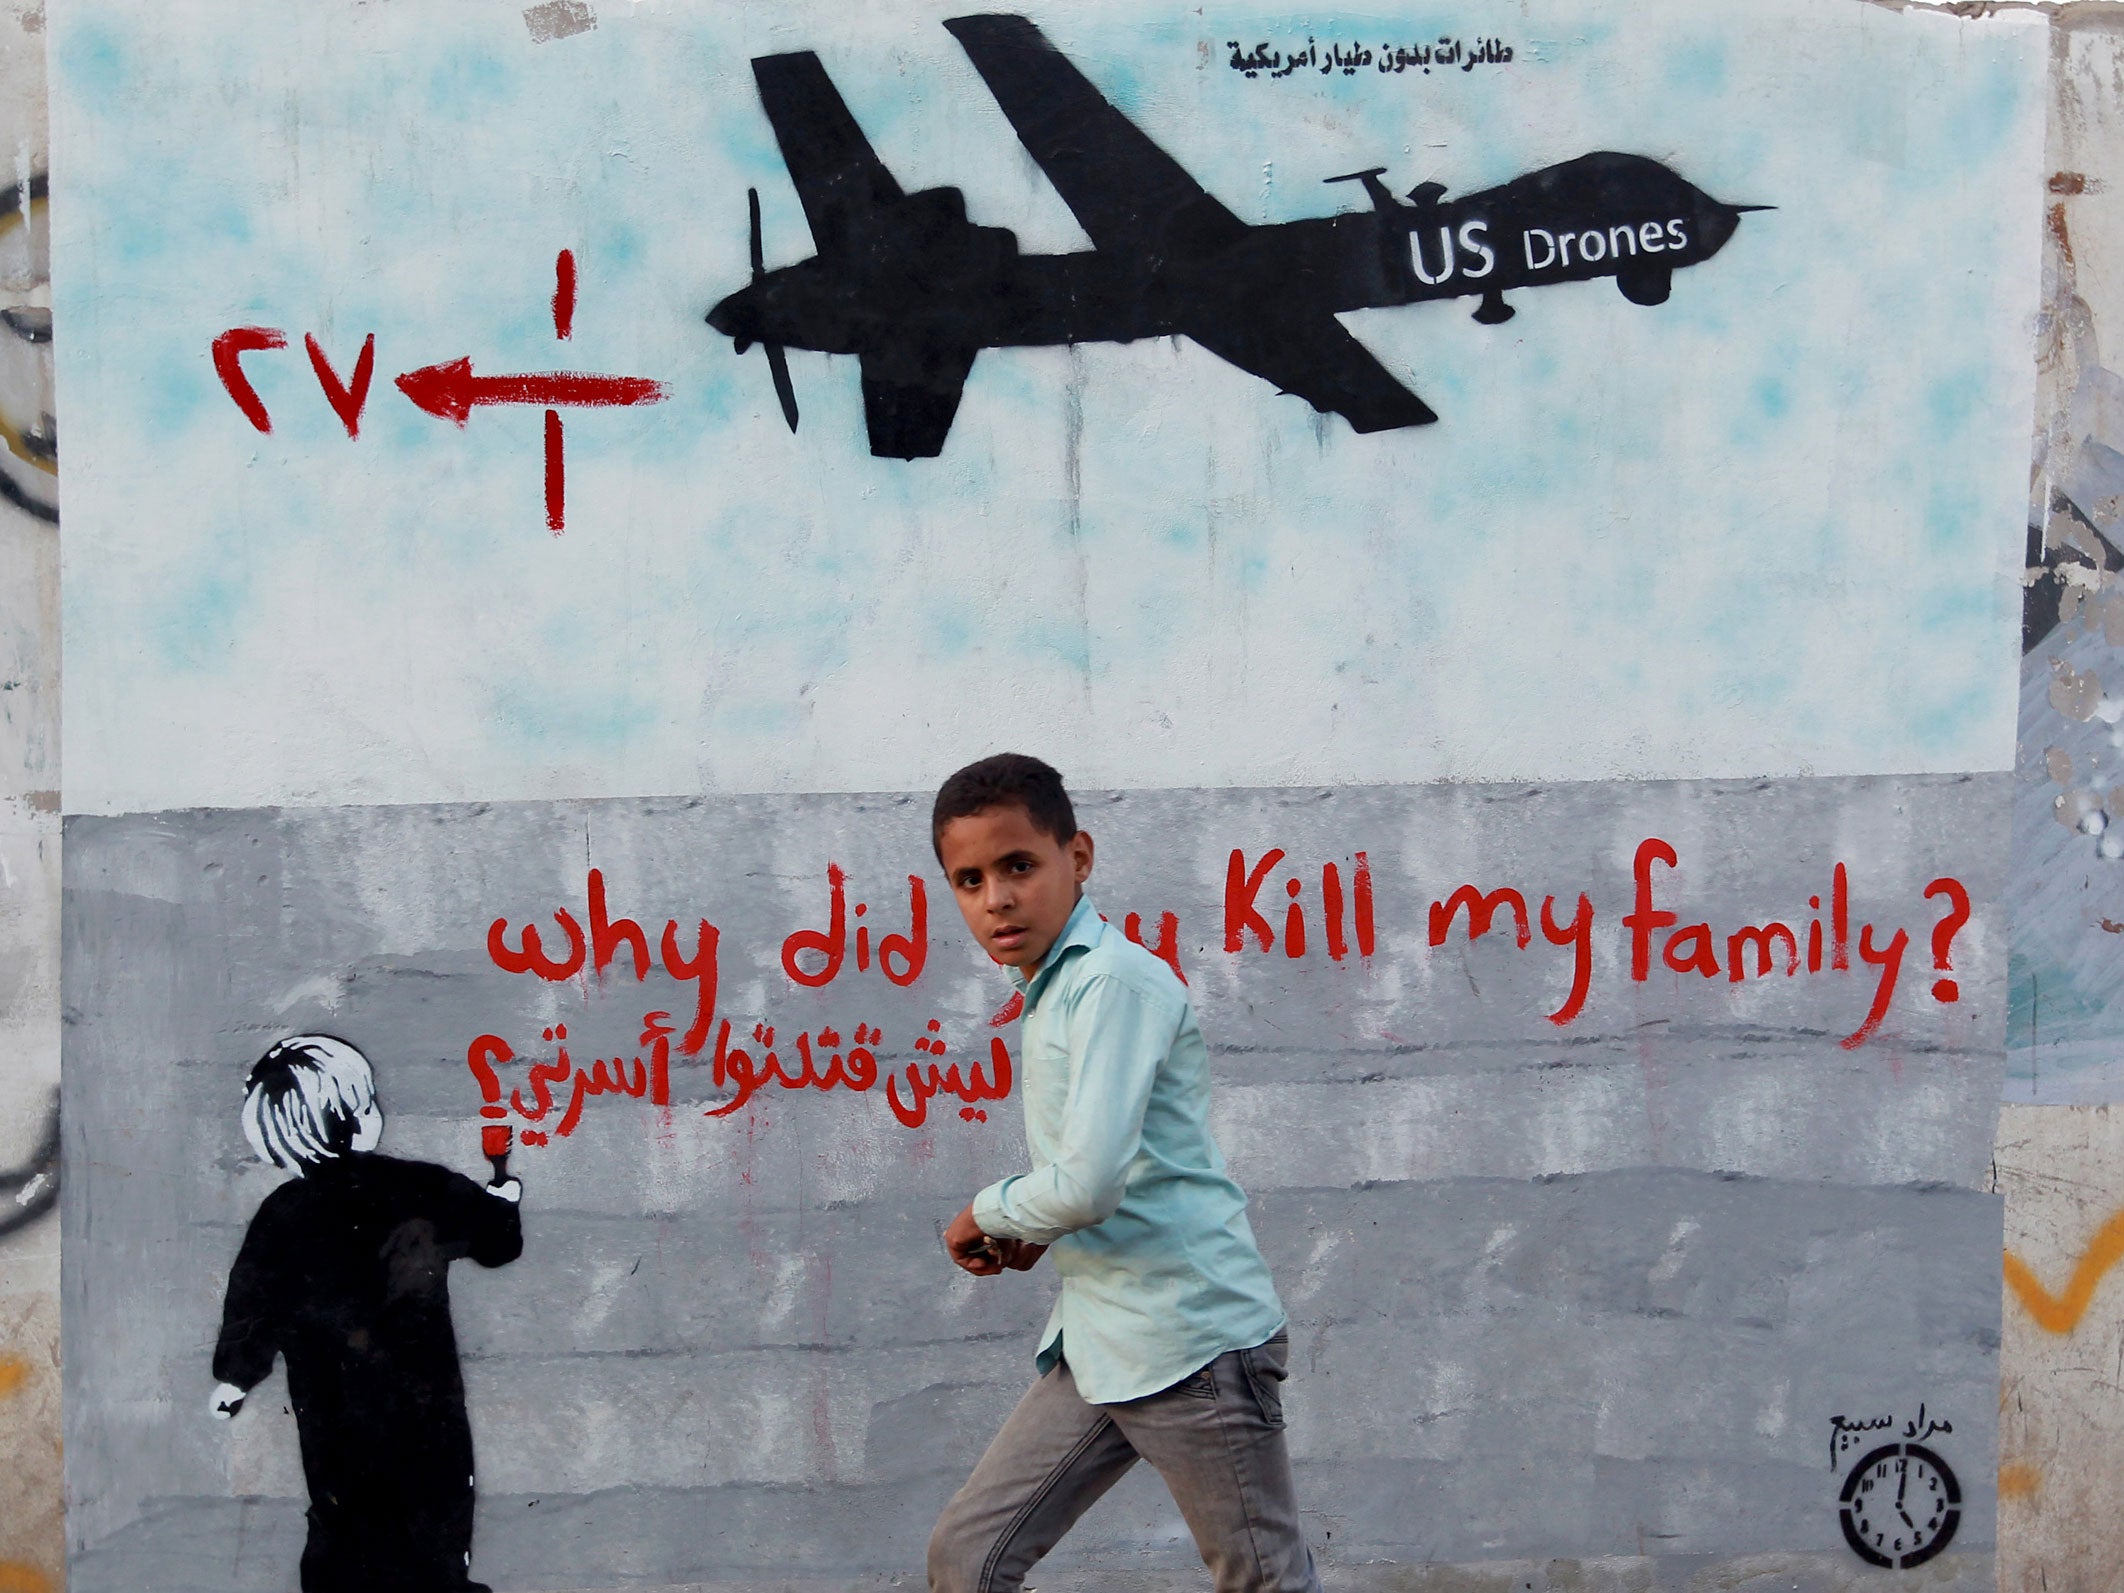 US drone strikes are estimated to have killed at least 423 civilians, but the figure could be closer to 960